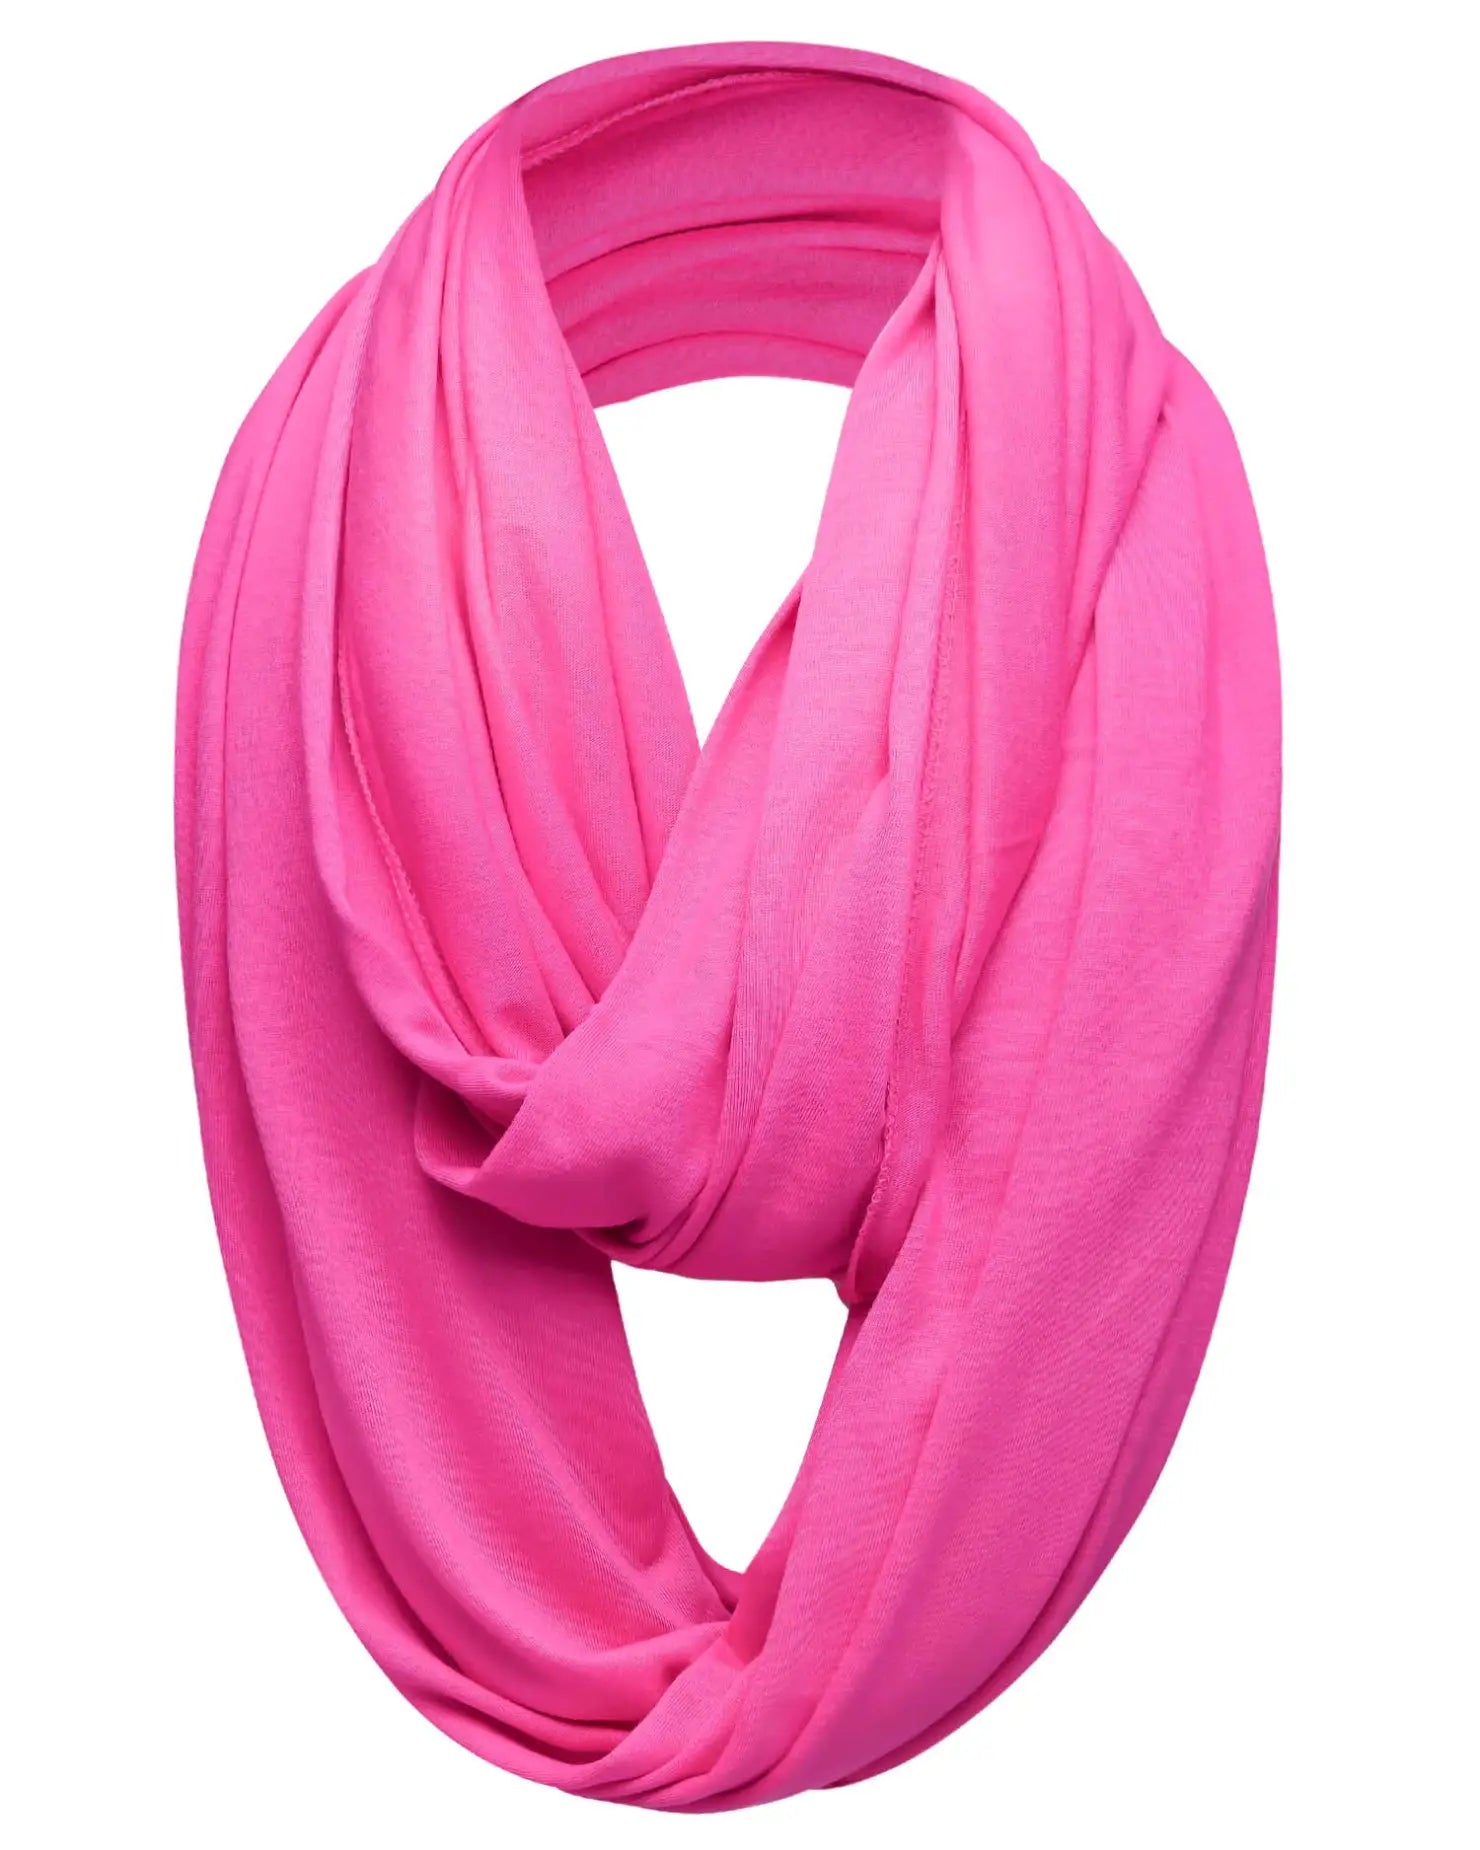 Pink cotton blend jersey winter snood scarf on white background.